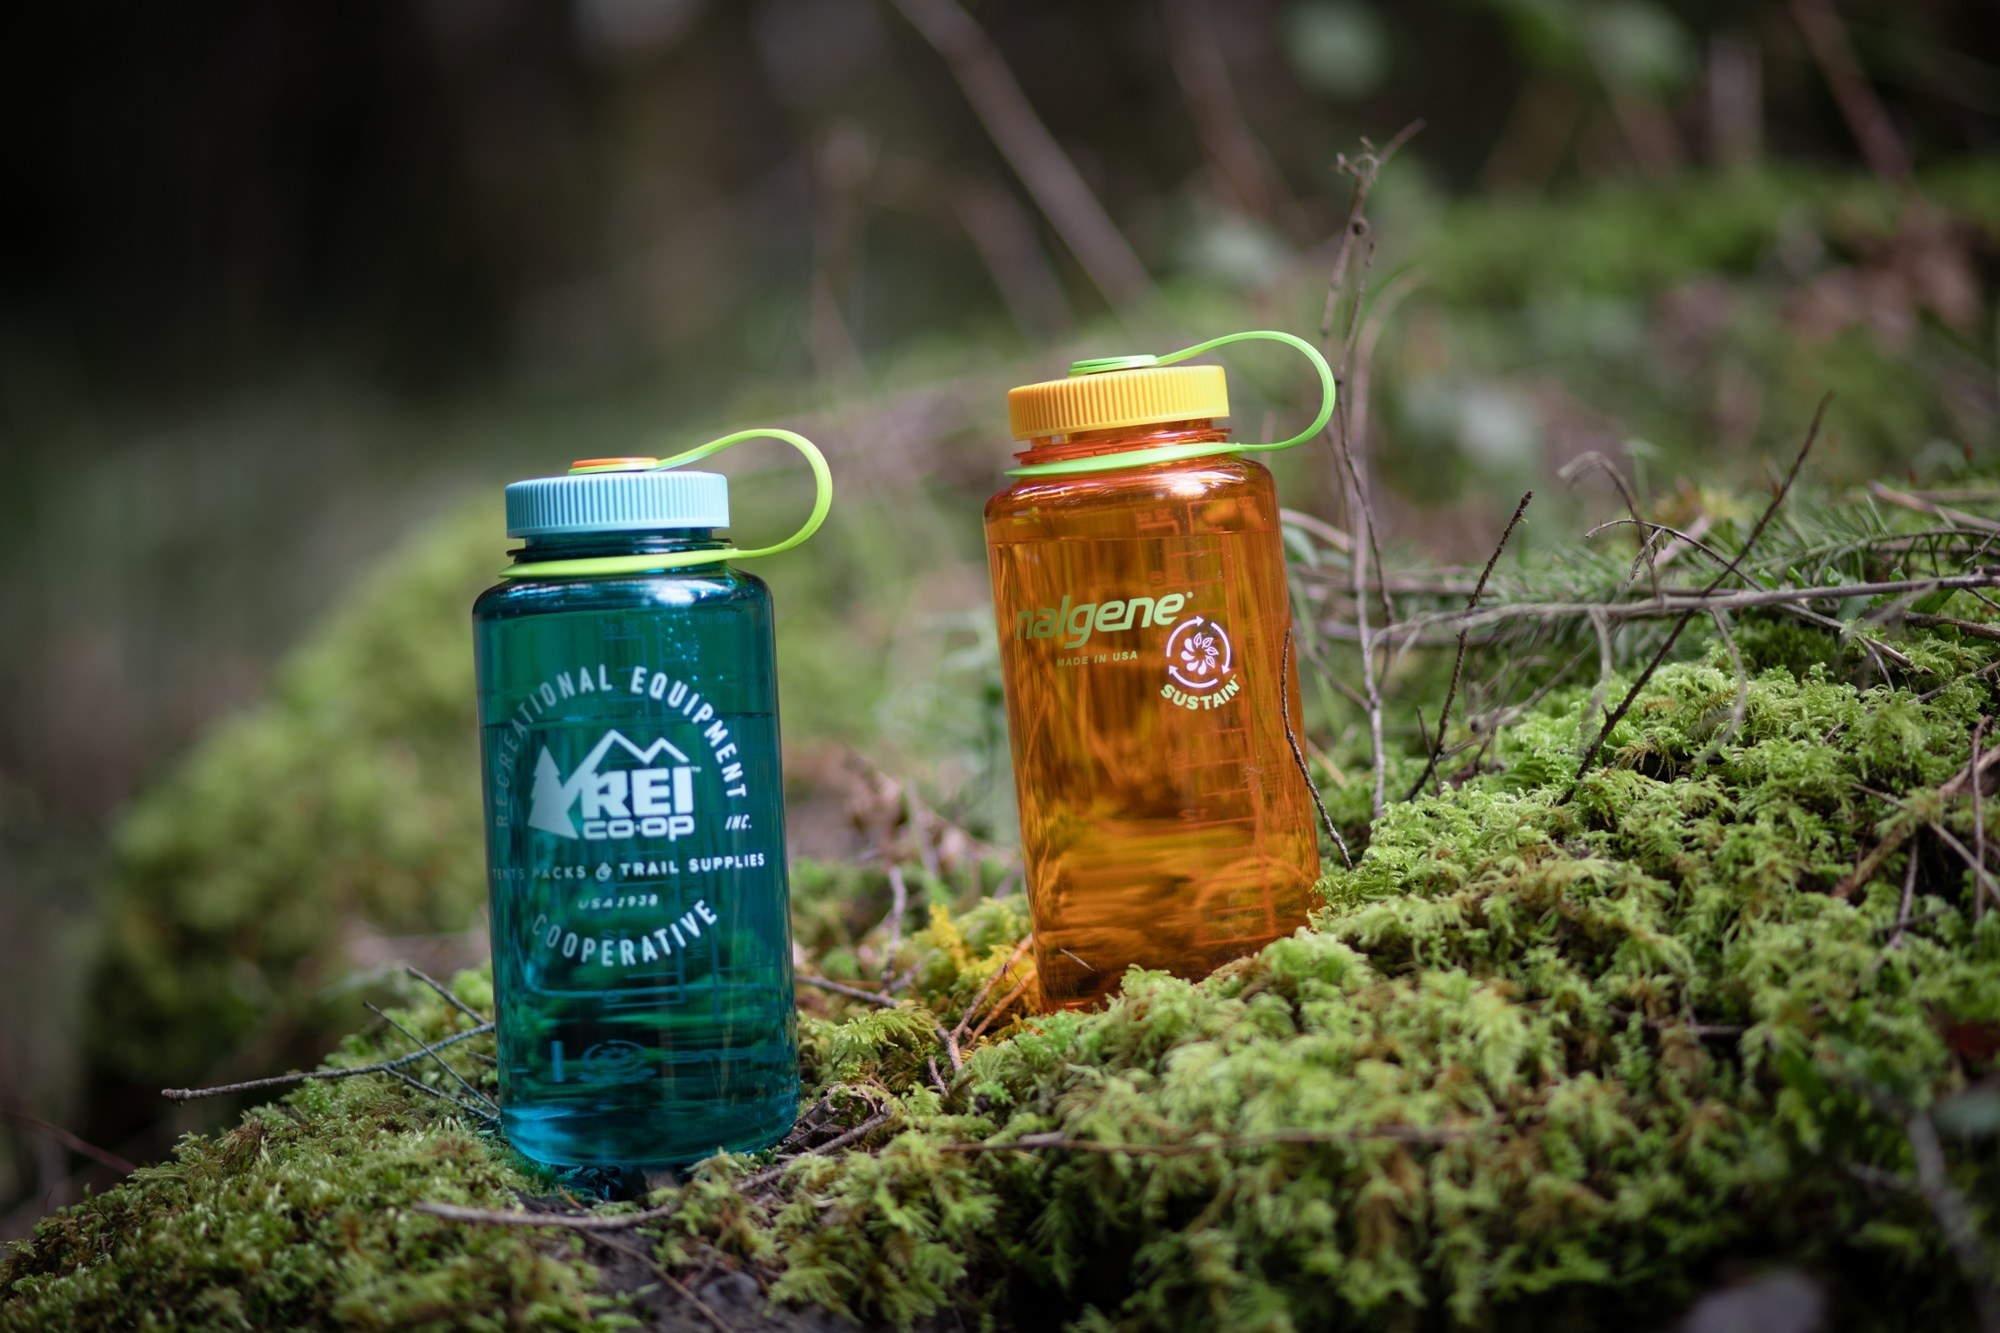 the blue and orange Nalgene water bottles perched on moss